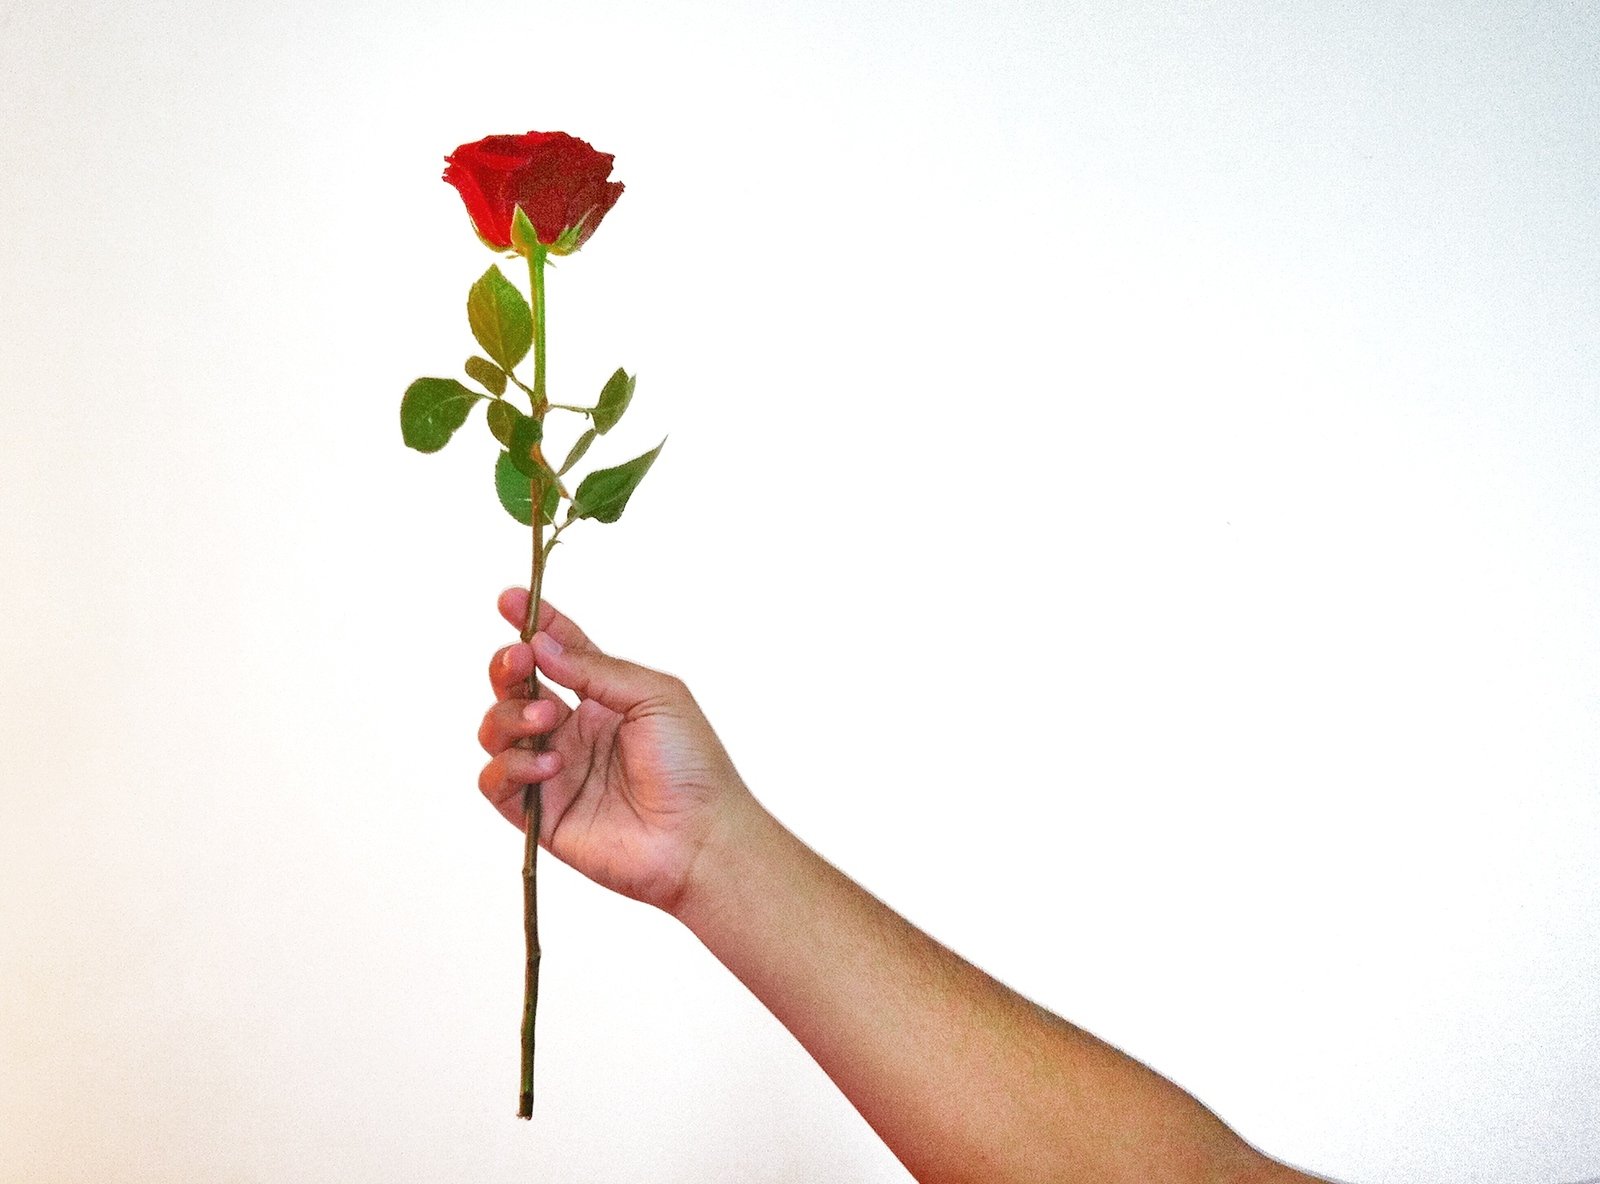 a person holds up a red flower against a white background